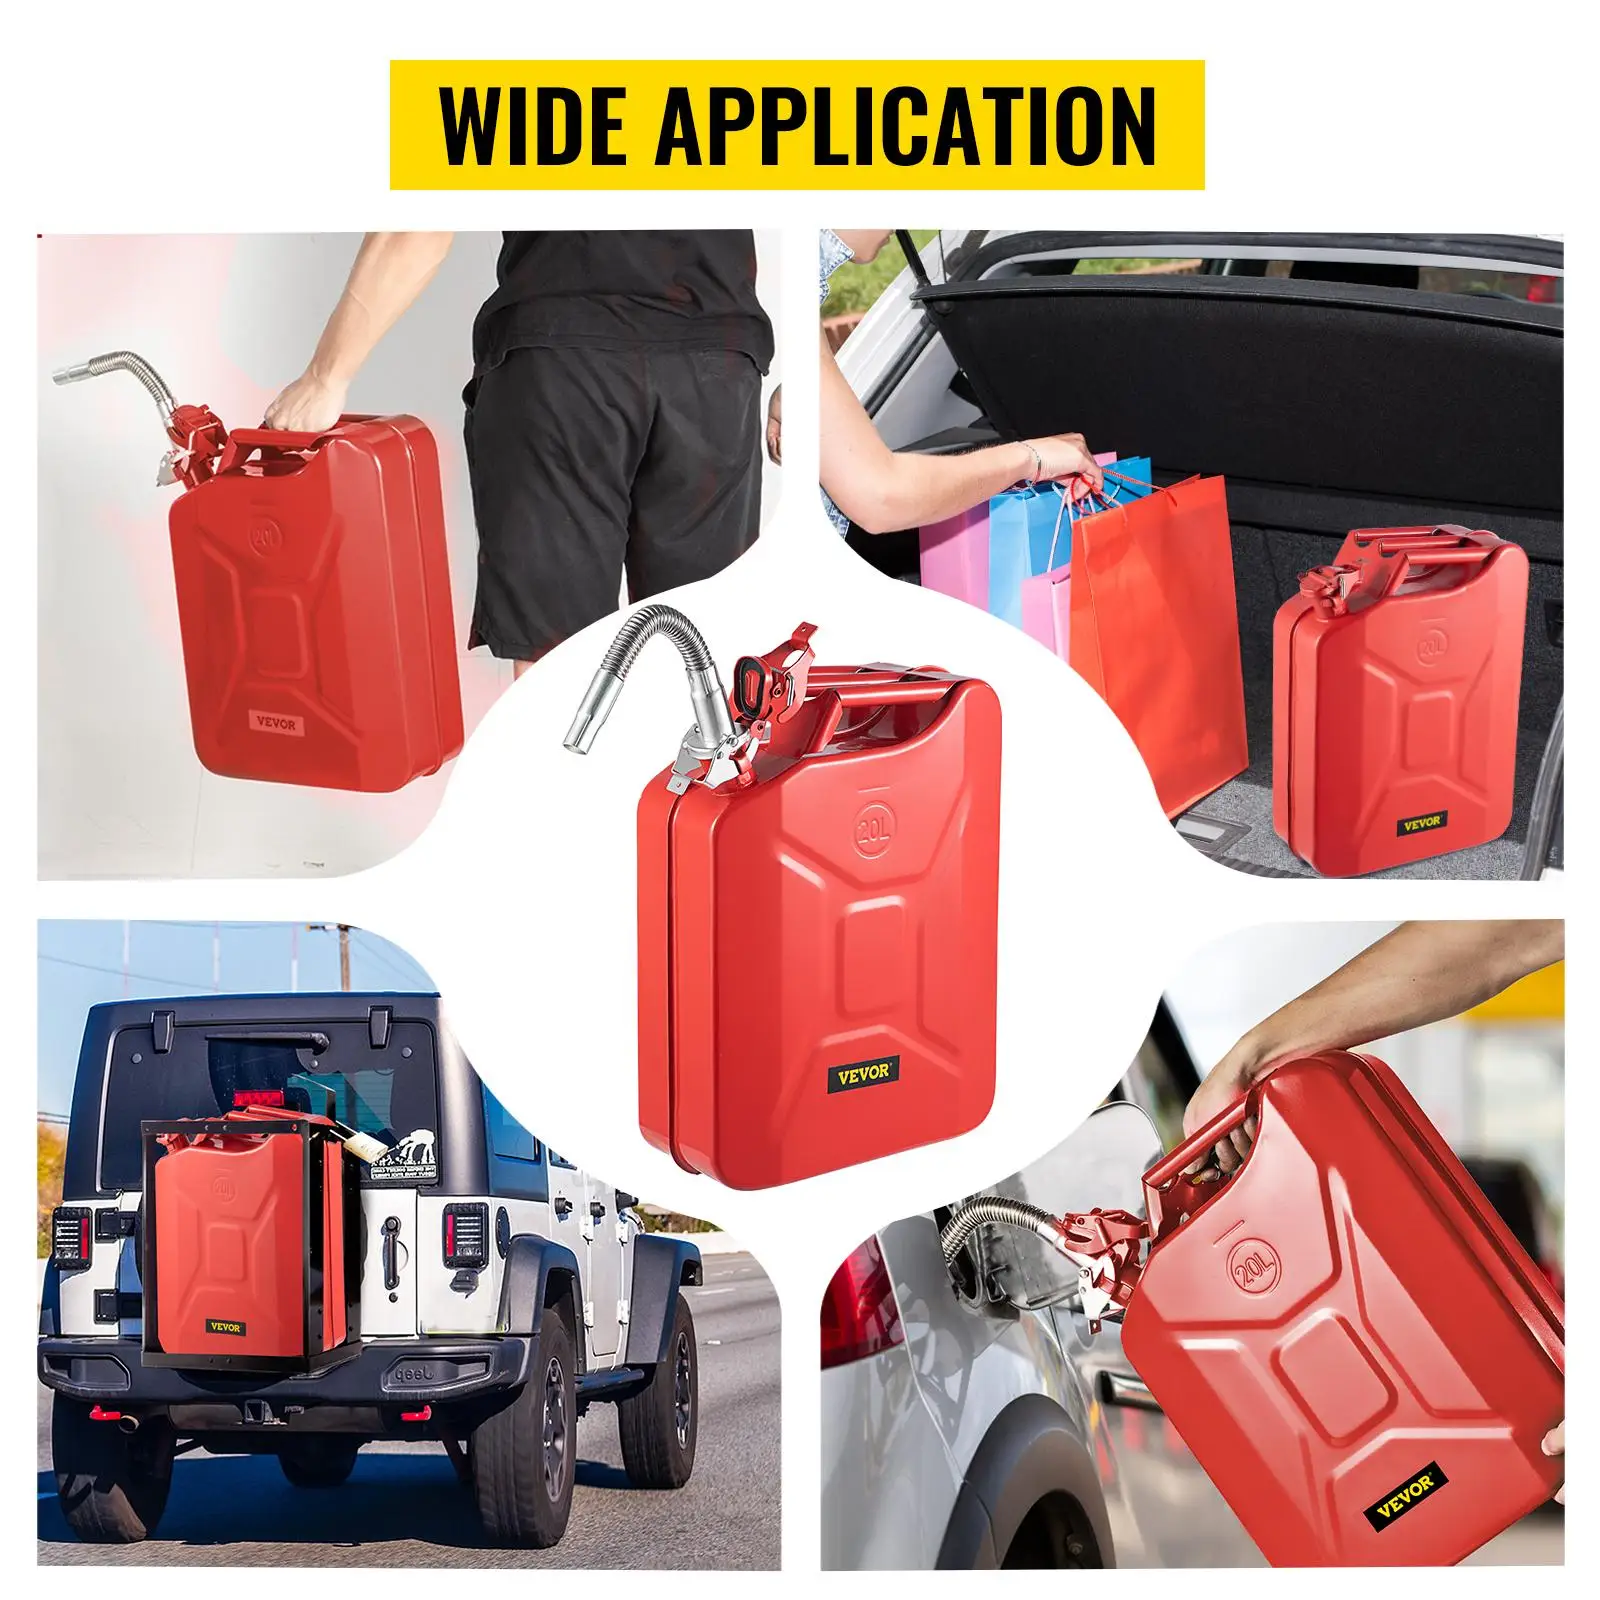 Wide Application of Jerry Gas Cans